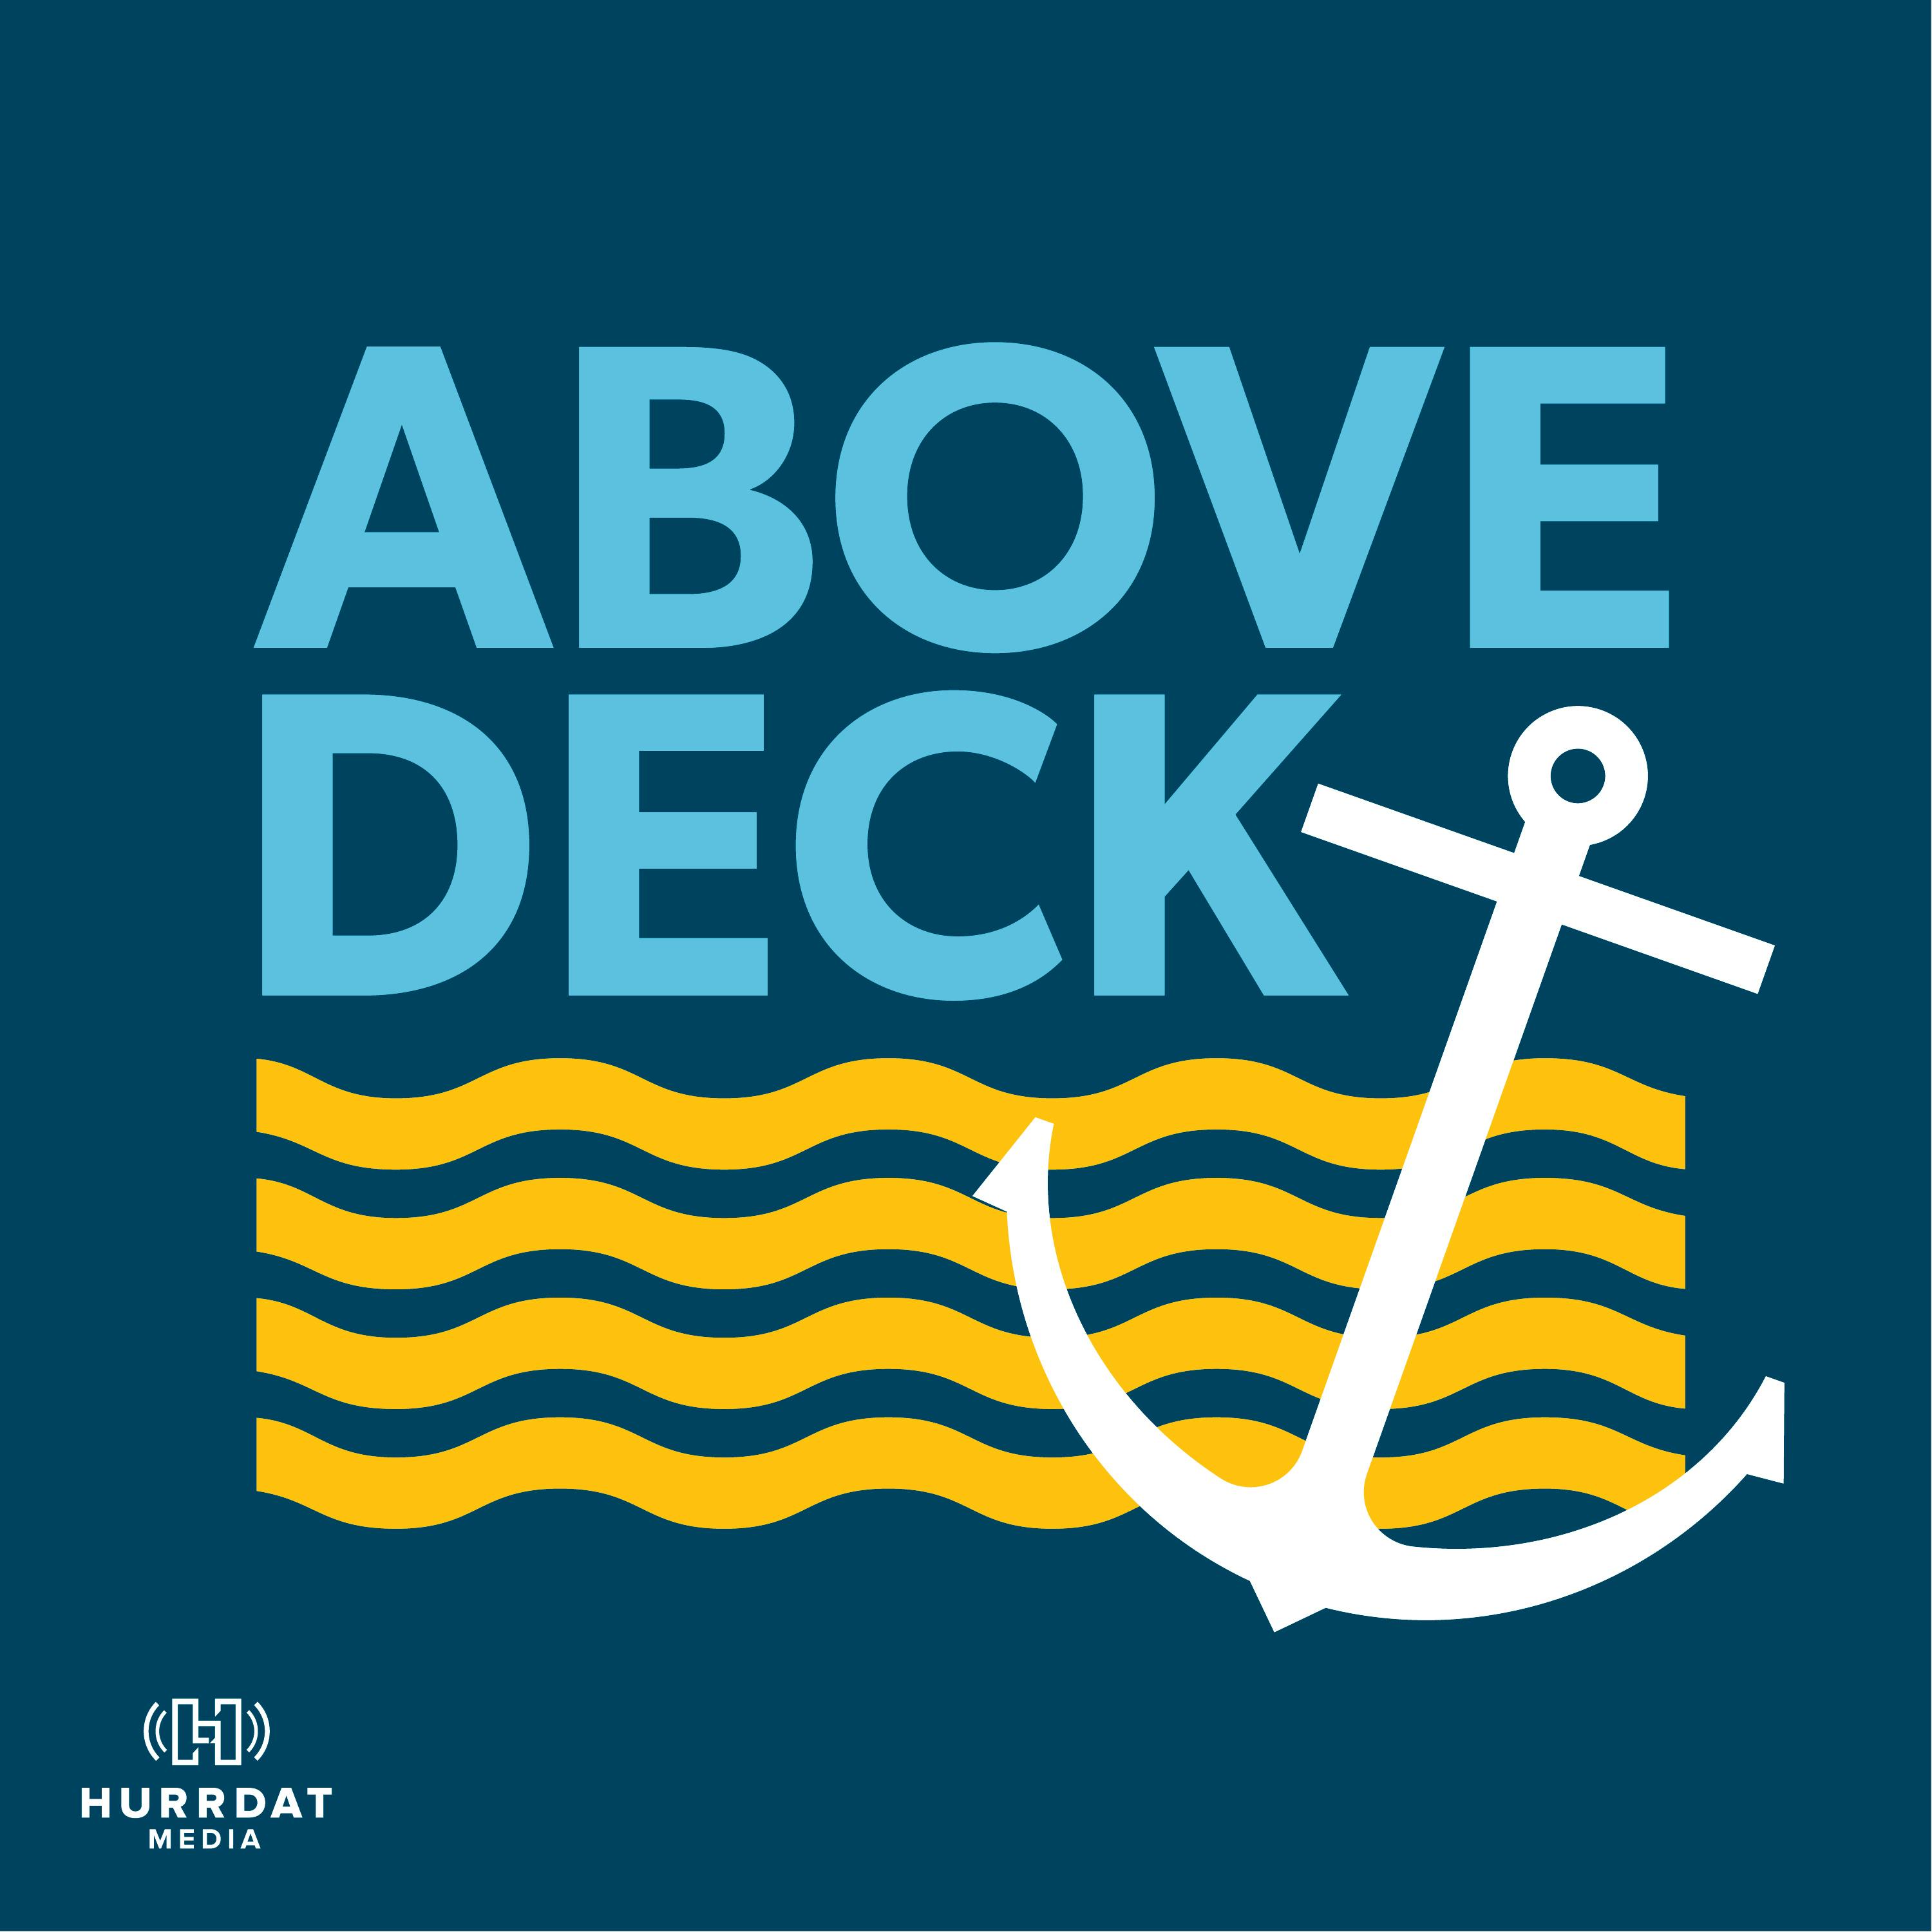 128. Interview with Chase Lemacks from Below Deck Sailing Yacht